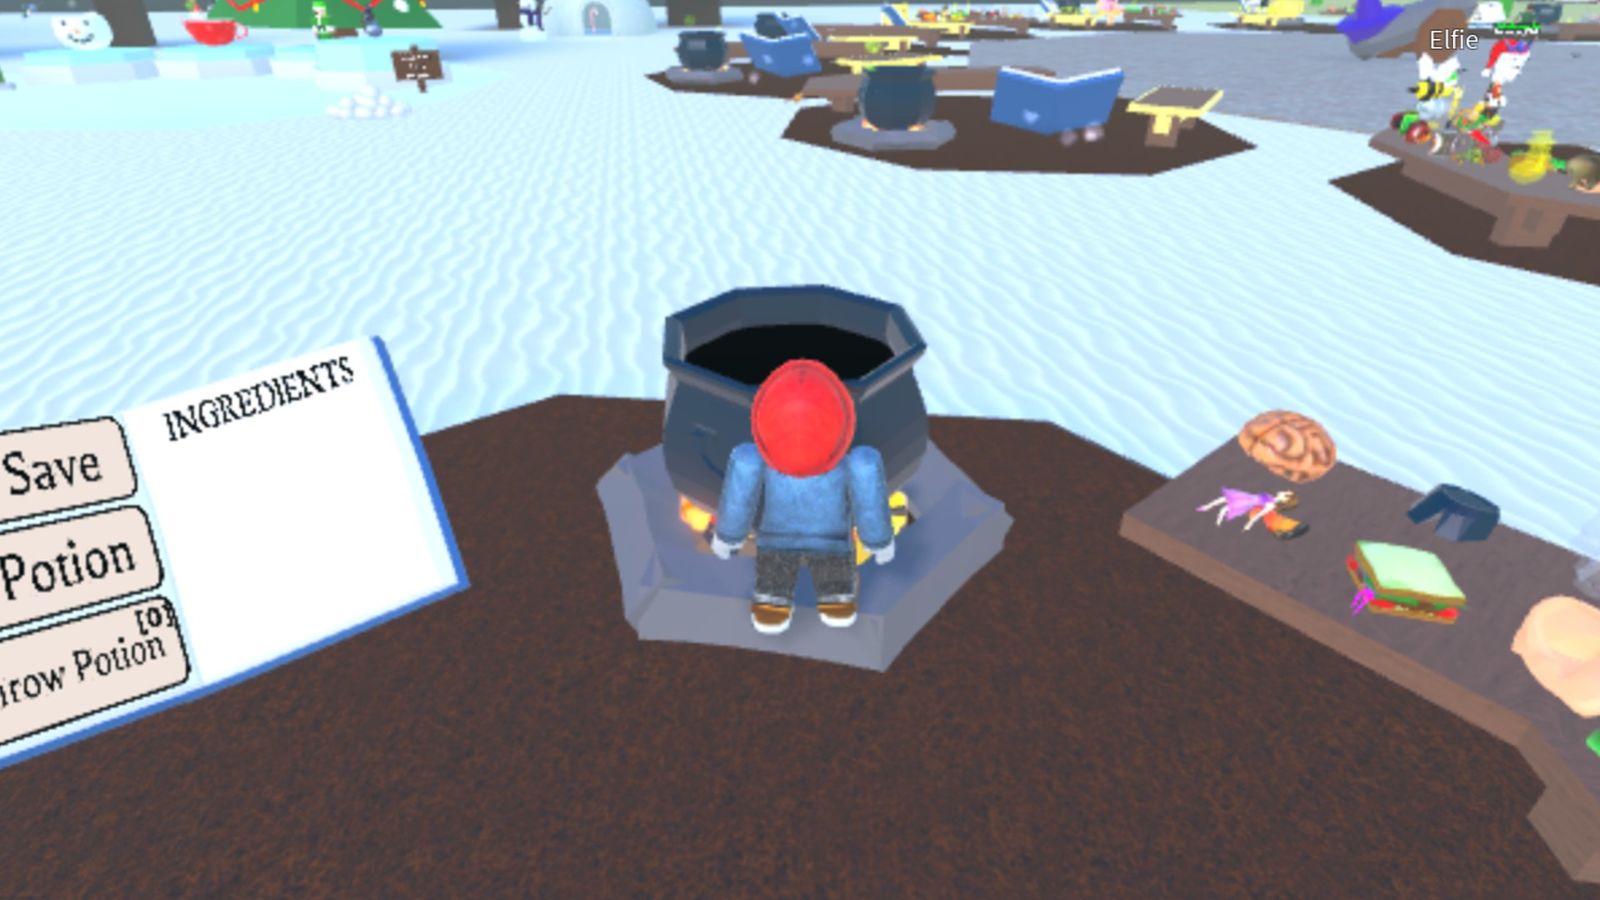 Screenshot from Wacky Wizards, showing a Roblox player hovering over a cauldron